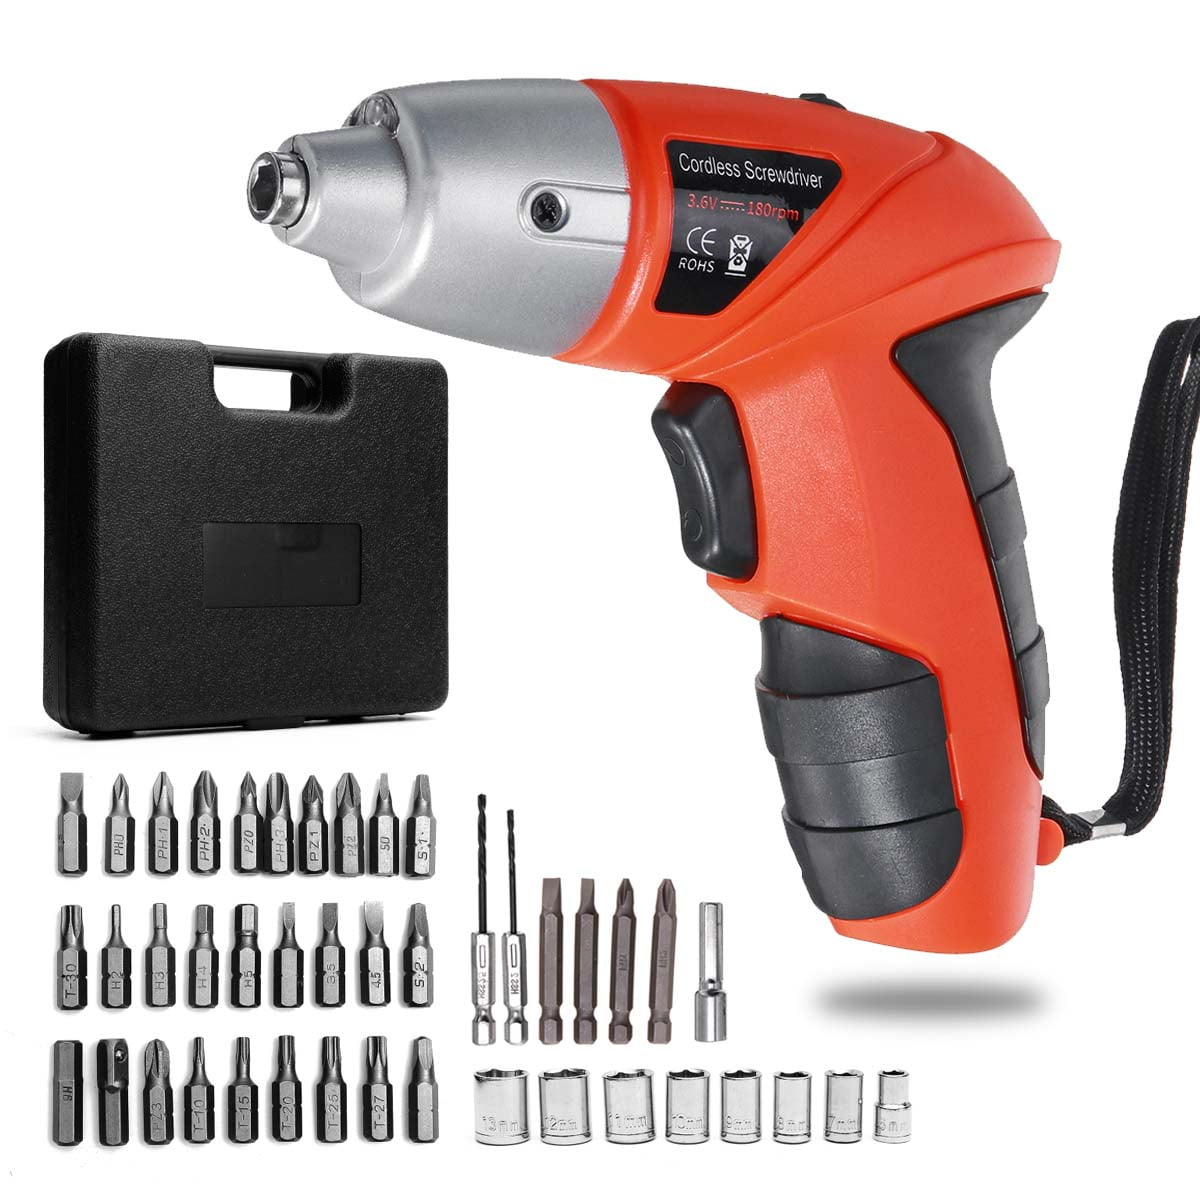 4.8V Electric Cordless Screwdriver with 12 Driver Bits Set Tool Kit REACHARGABLE 